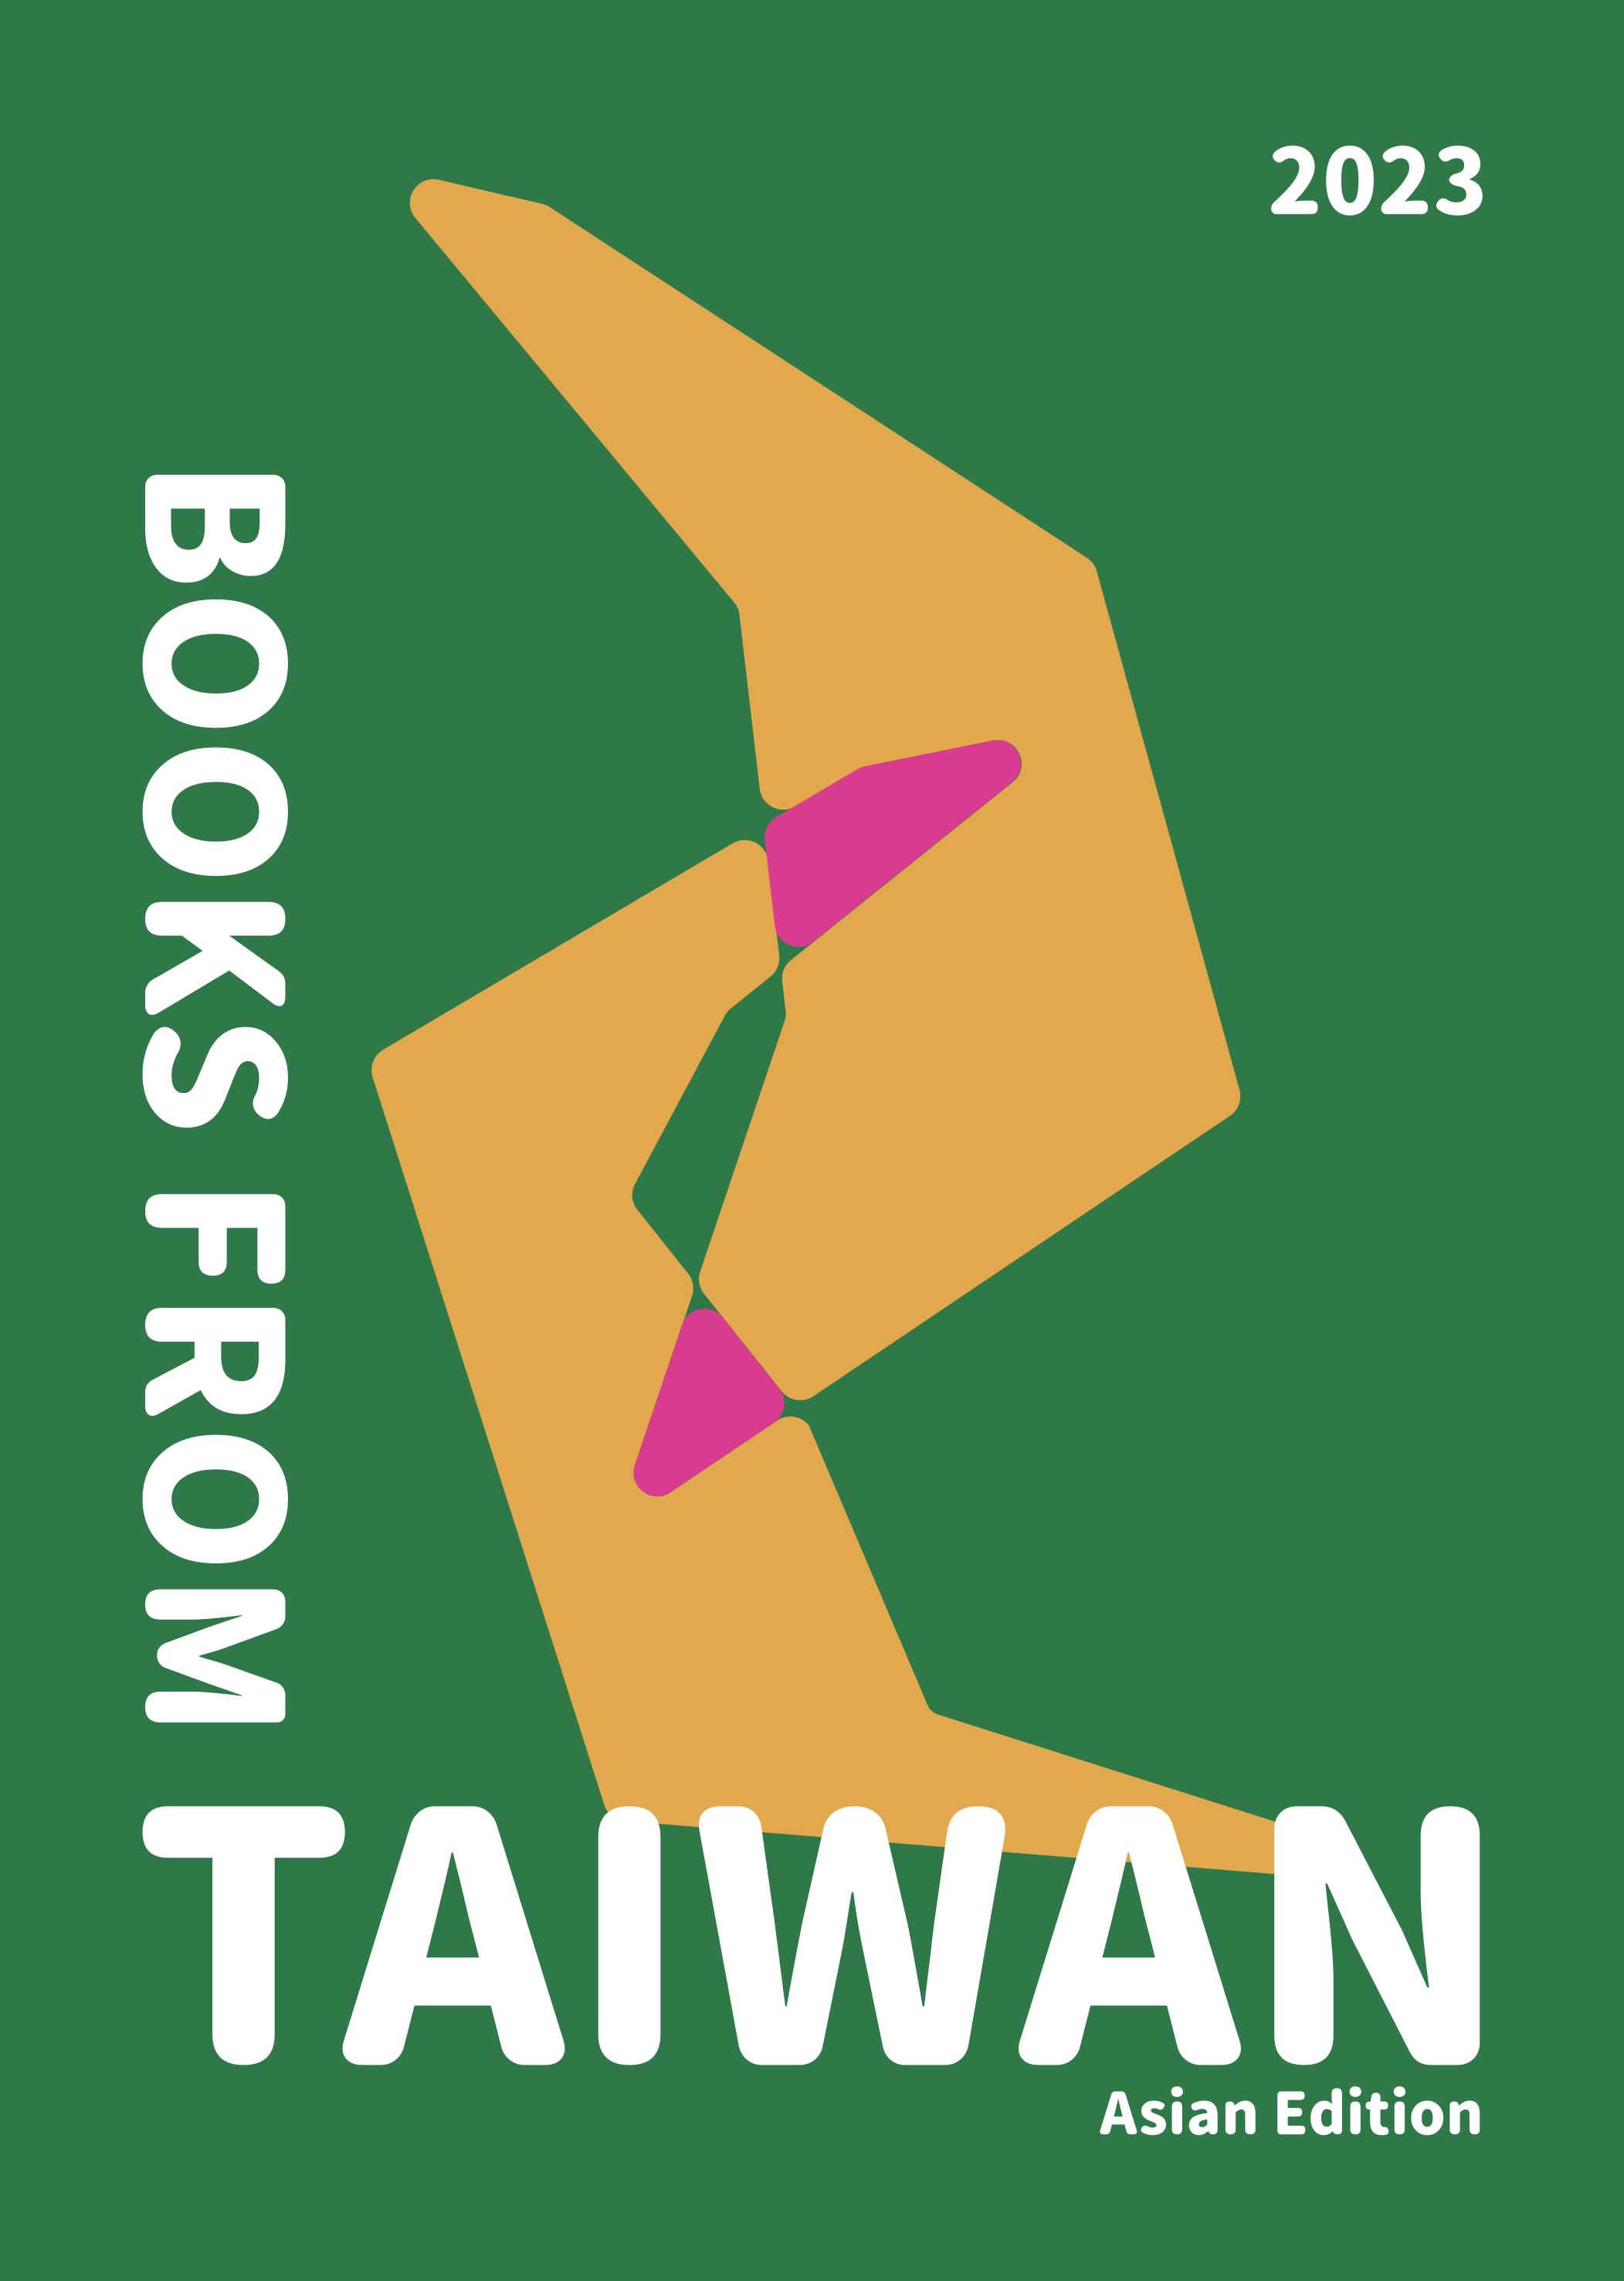 Books from Taiwan Asian Edition 2023